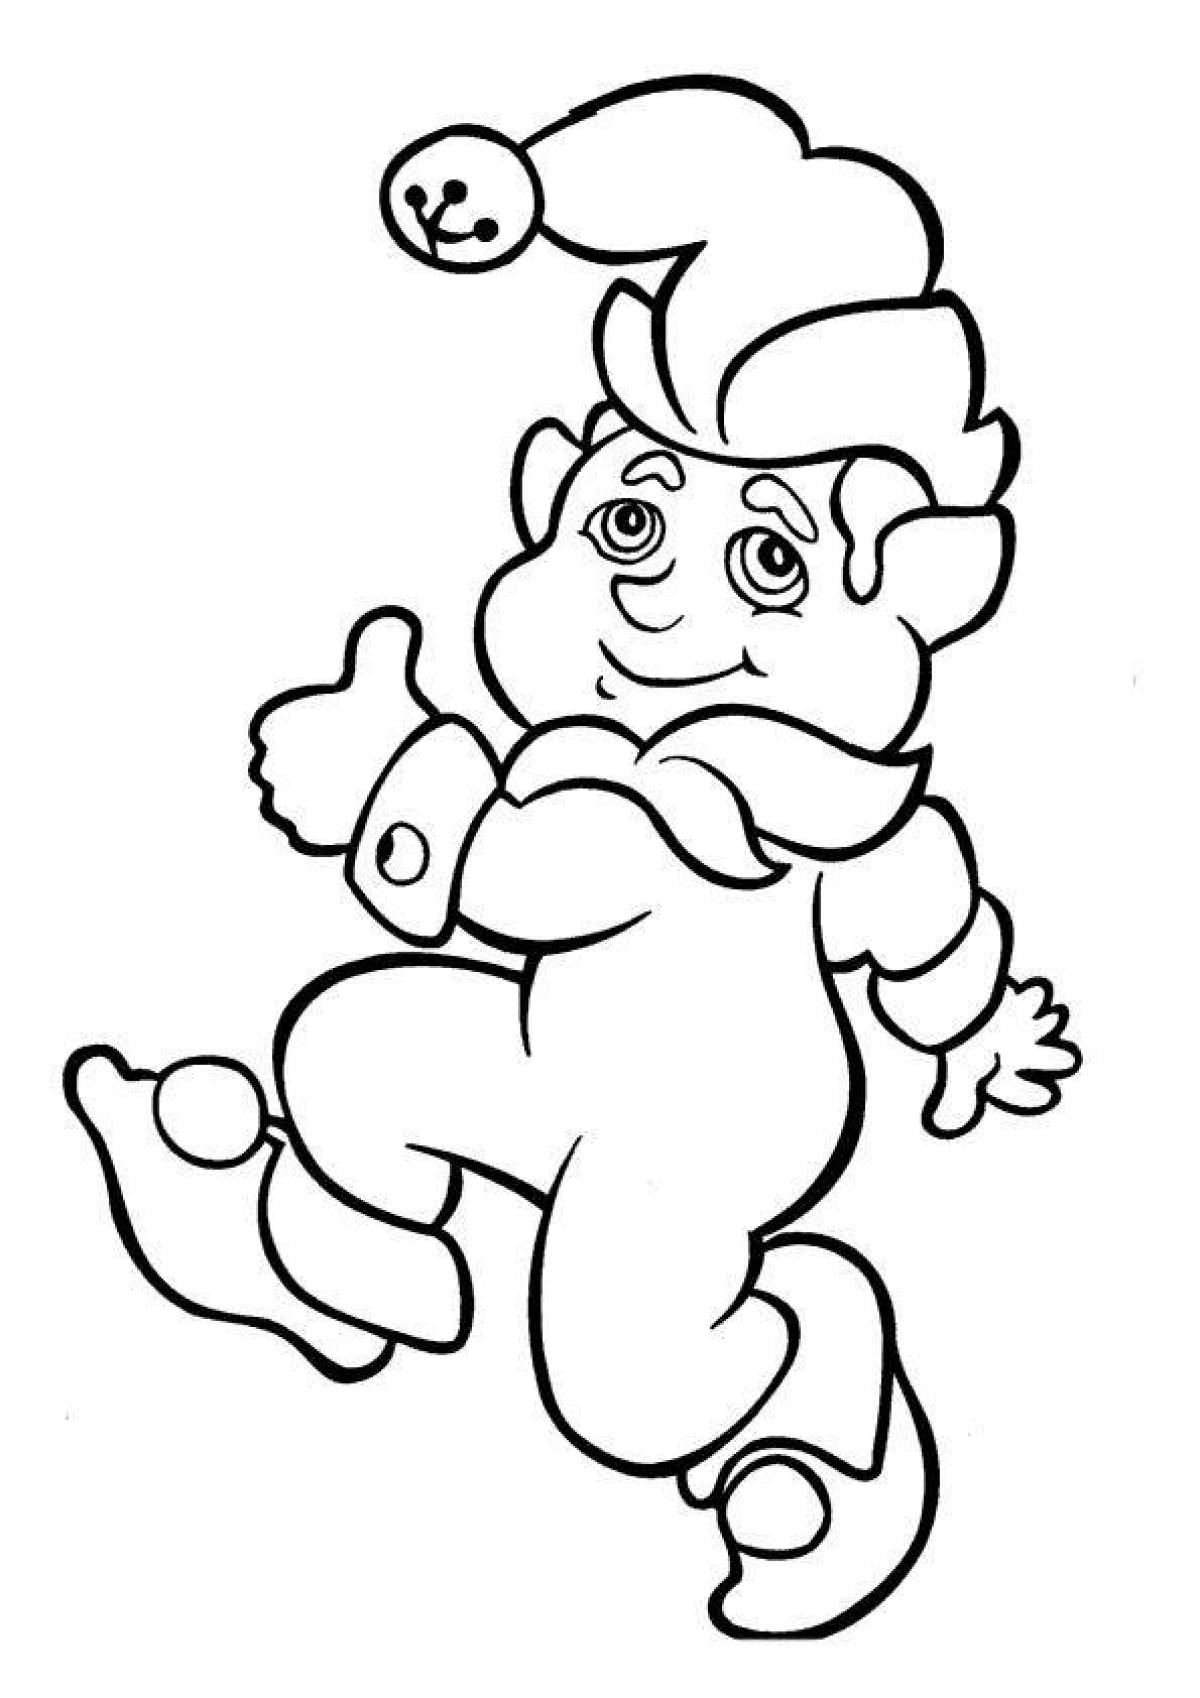 Gnomes humorous coloring pages